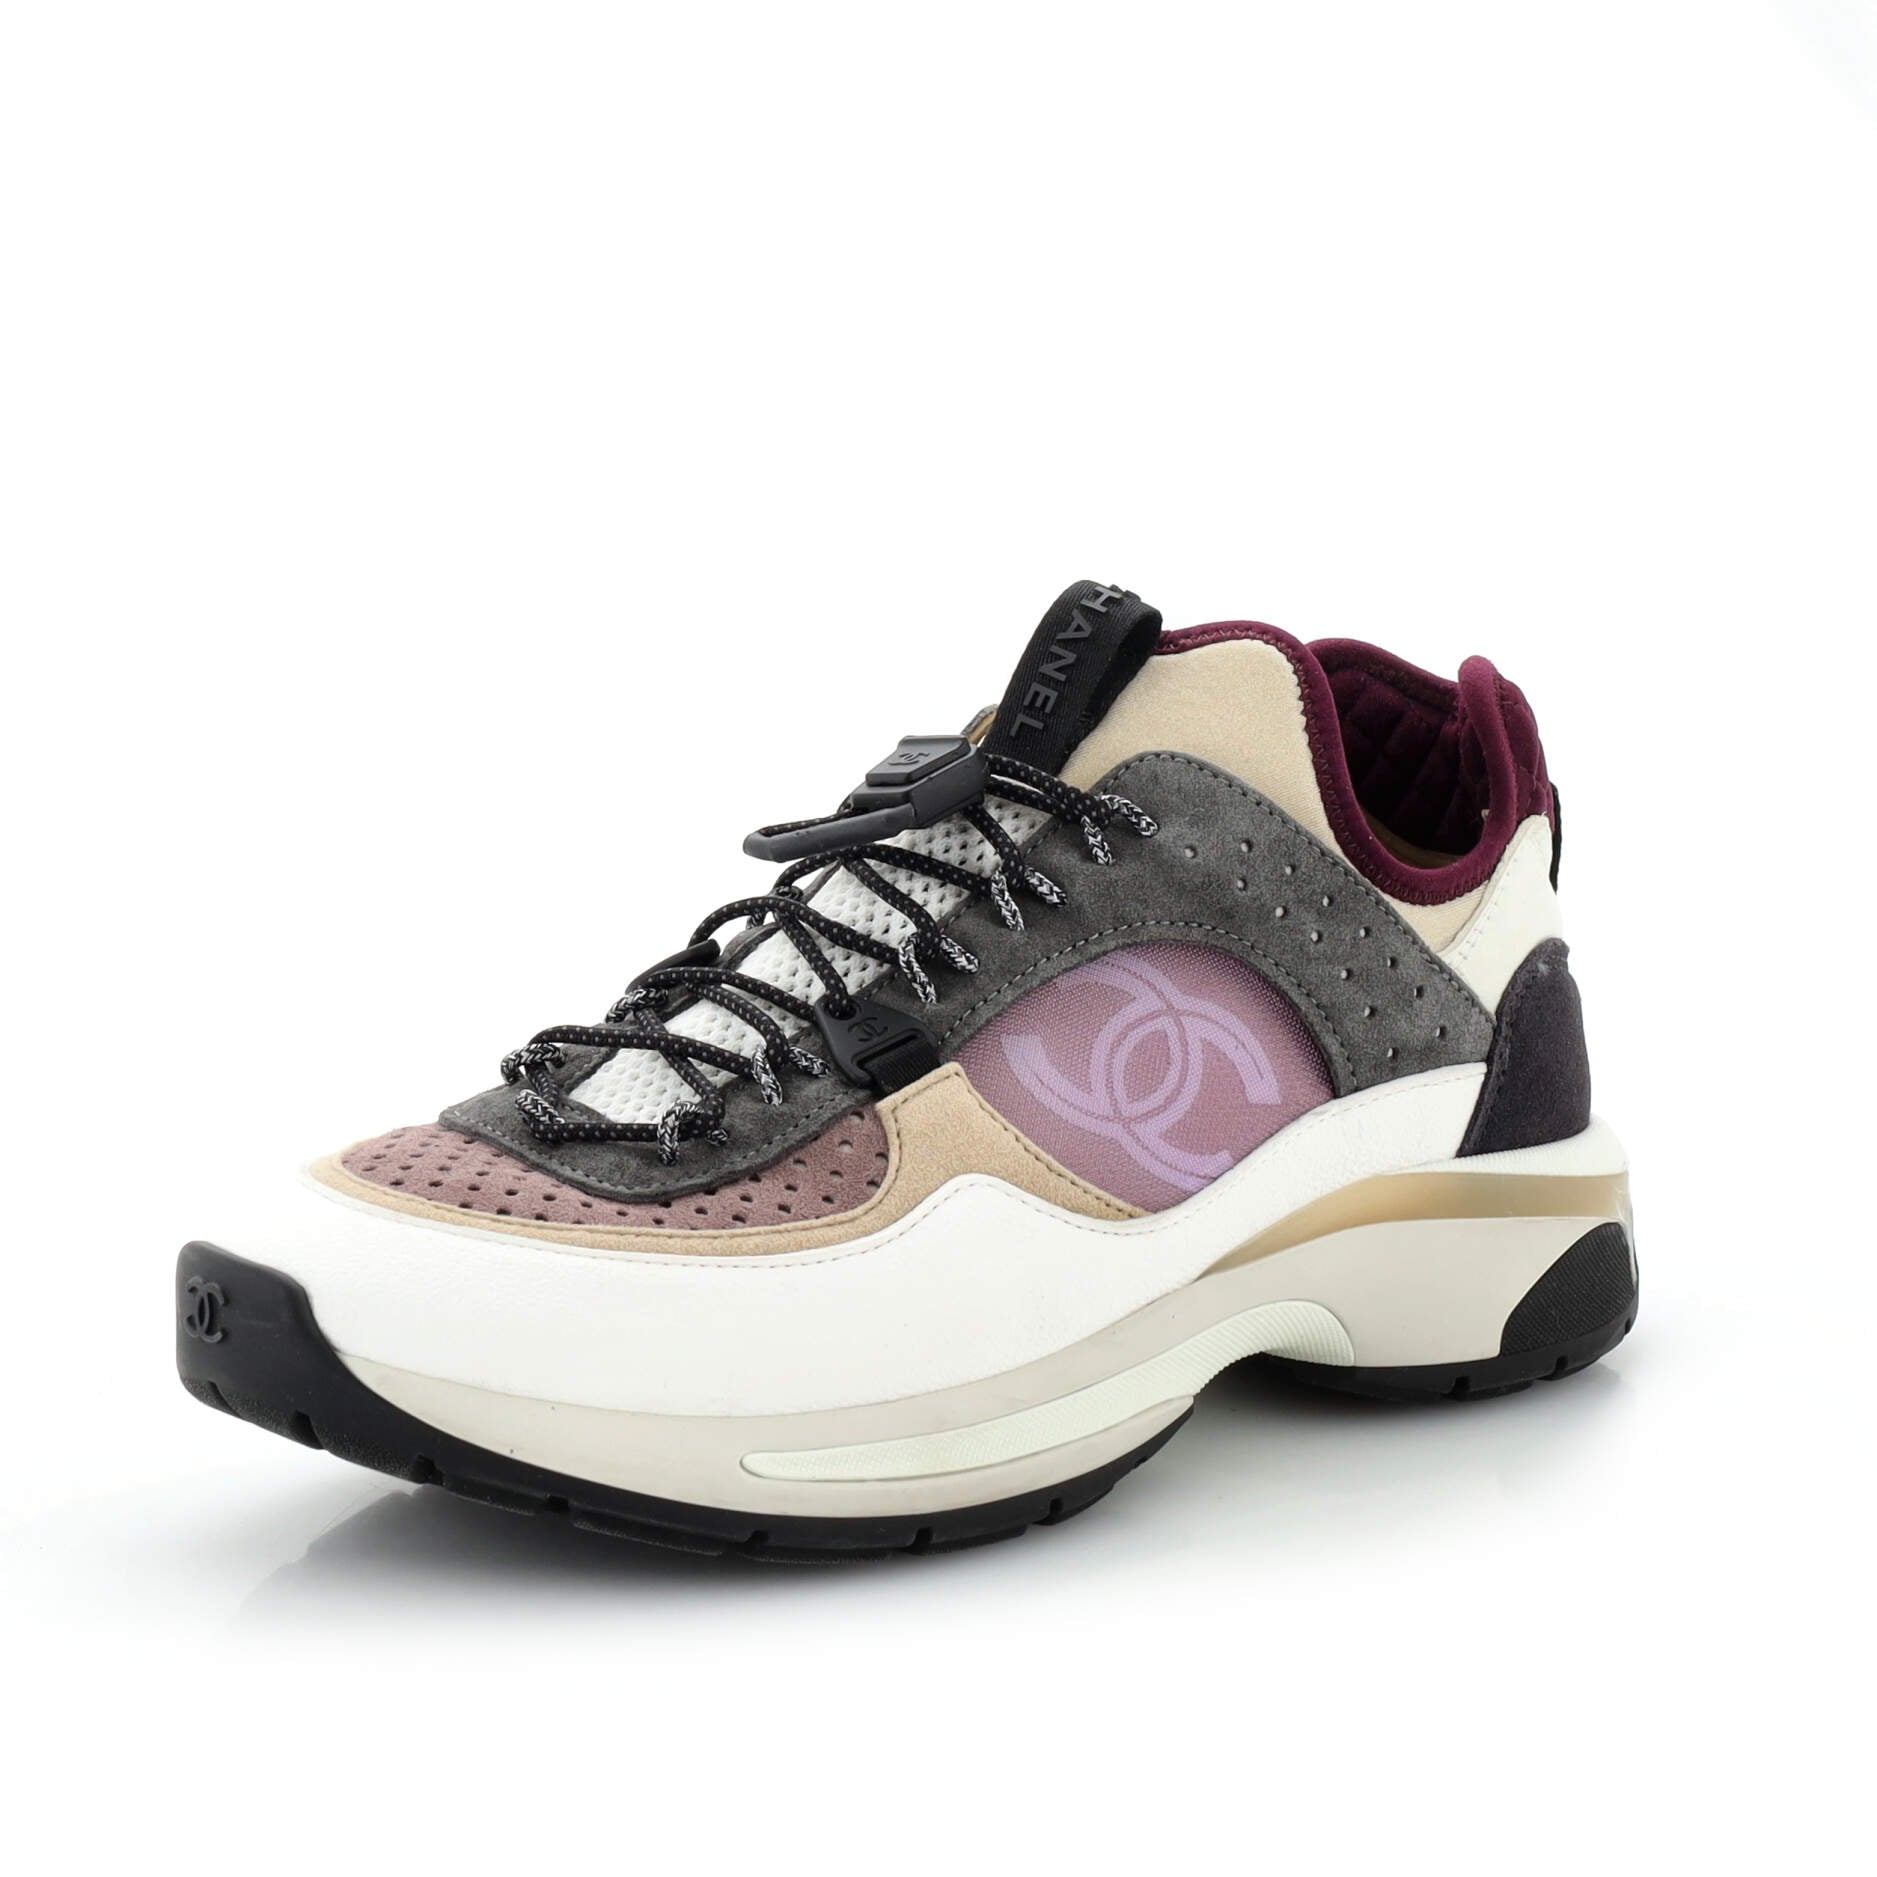 Women's CC Drawstring Sneakers Mesh with Suede and Leather